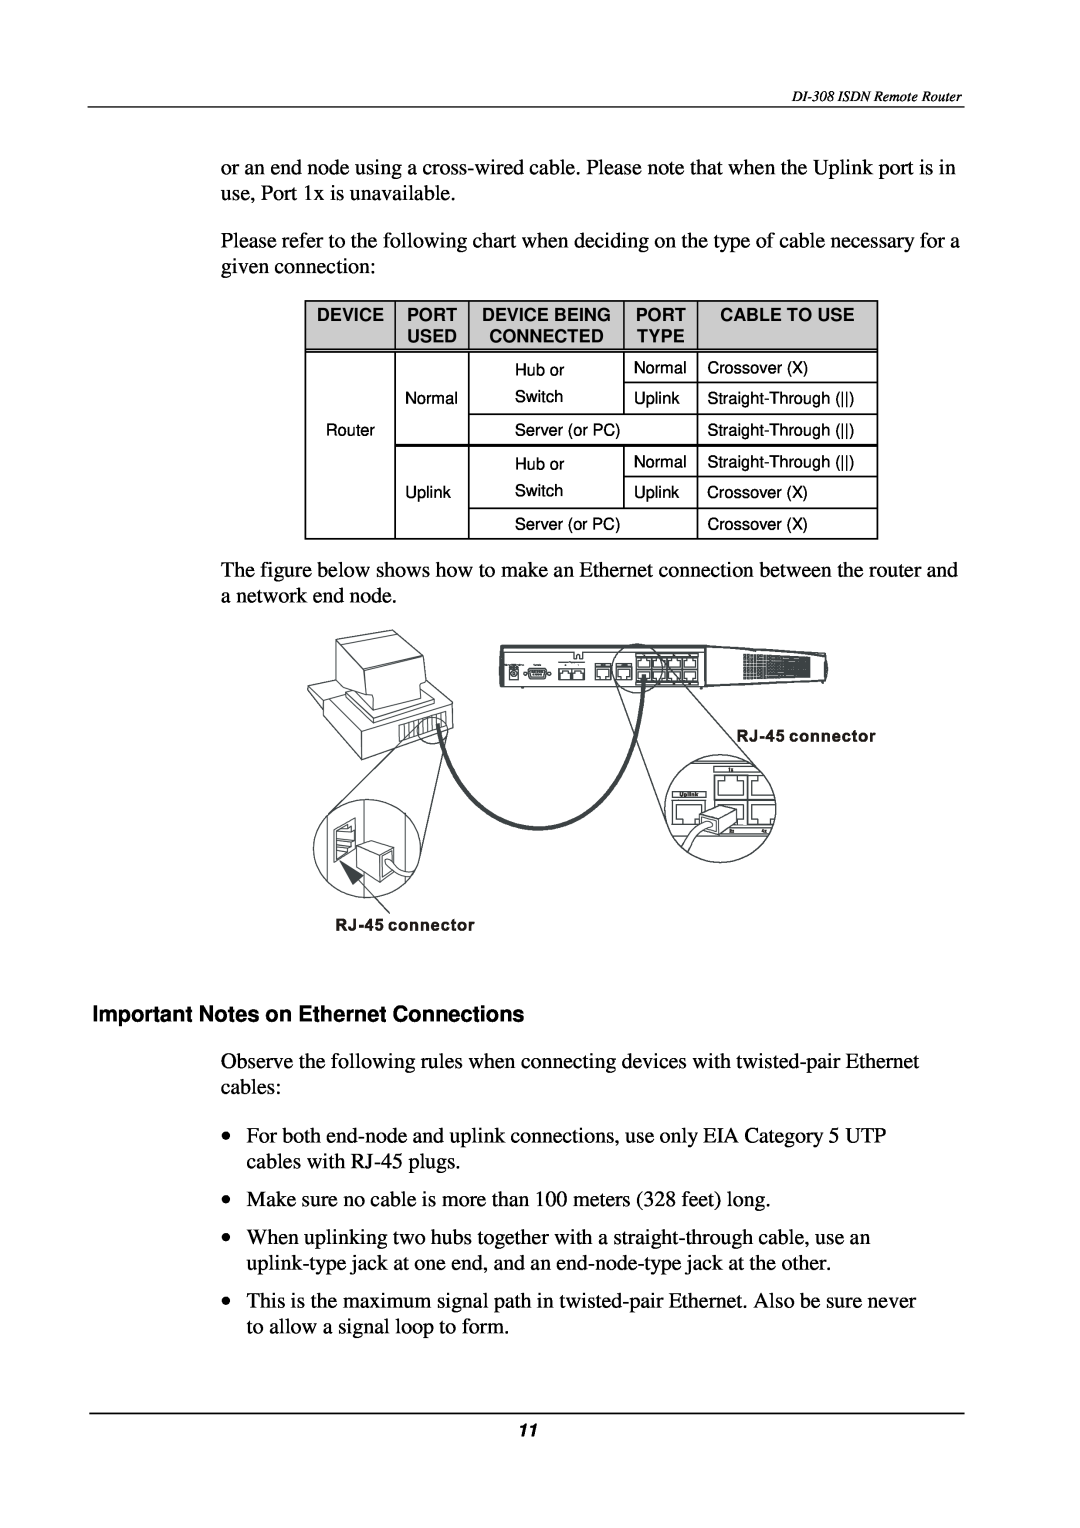 D-Link DI-308 manual Important Notes on Ethernet Connections 